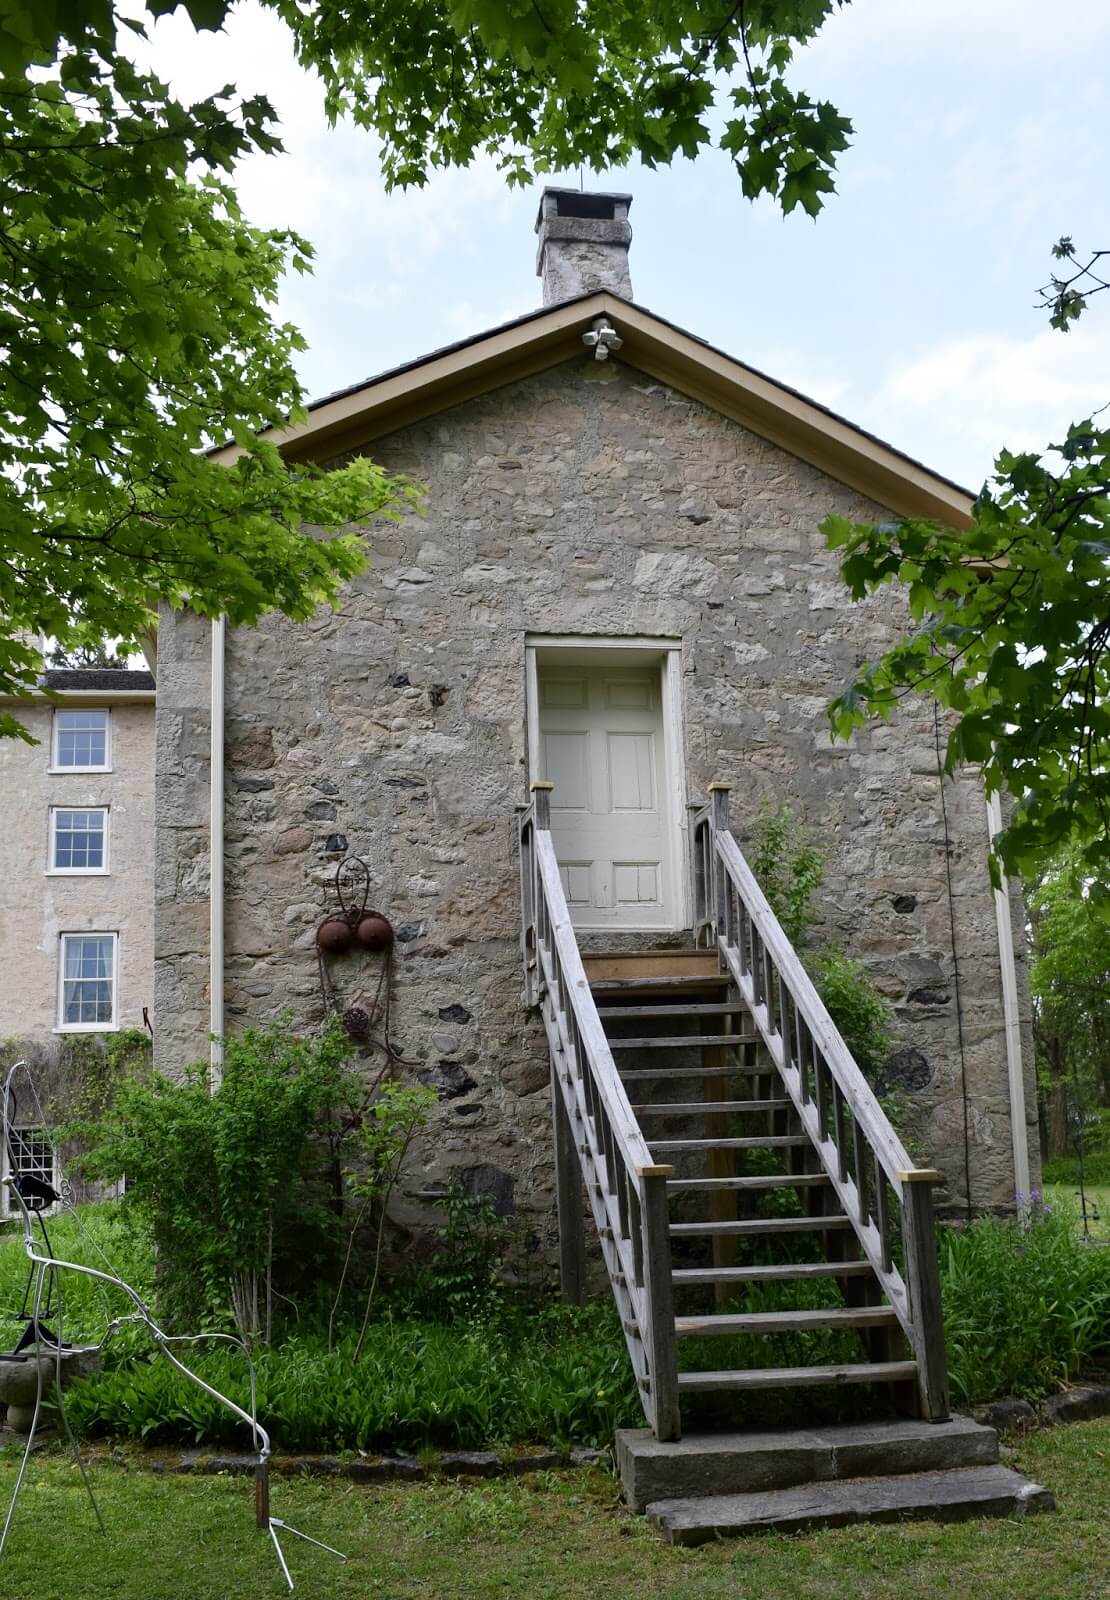 A rear perspective of the gynasium wing at Rockwod Academy, a historic stone building with staircase leading up to a door